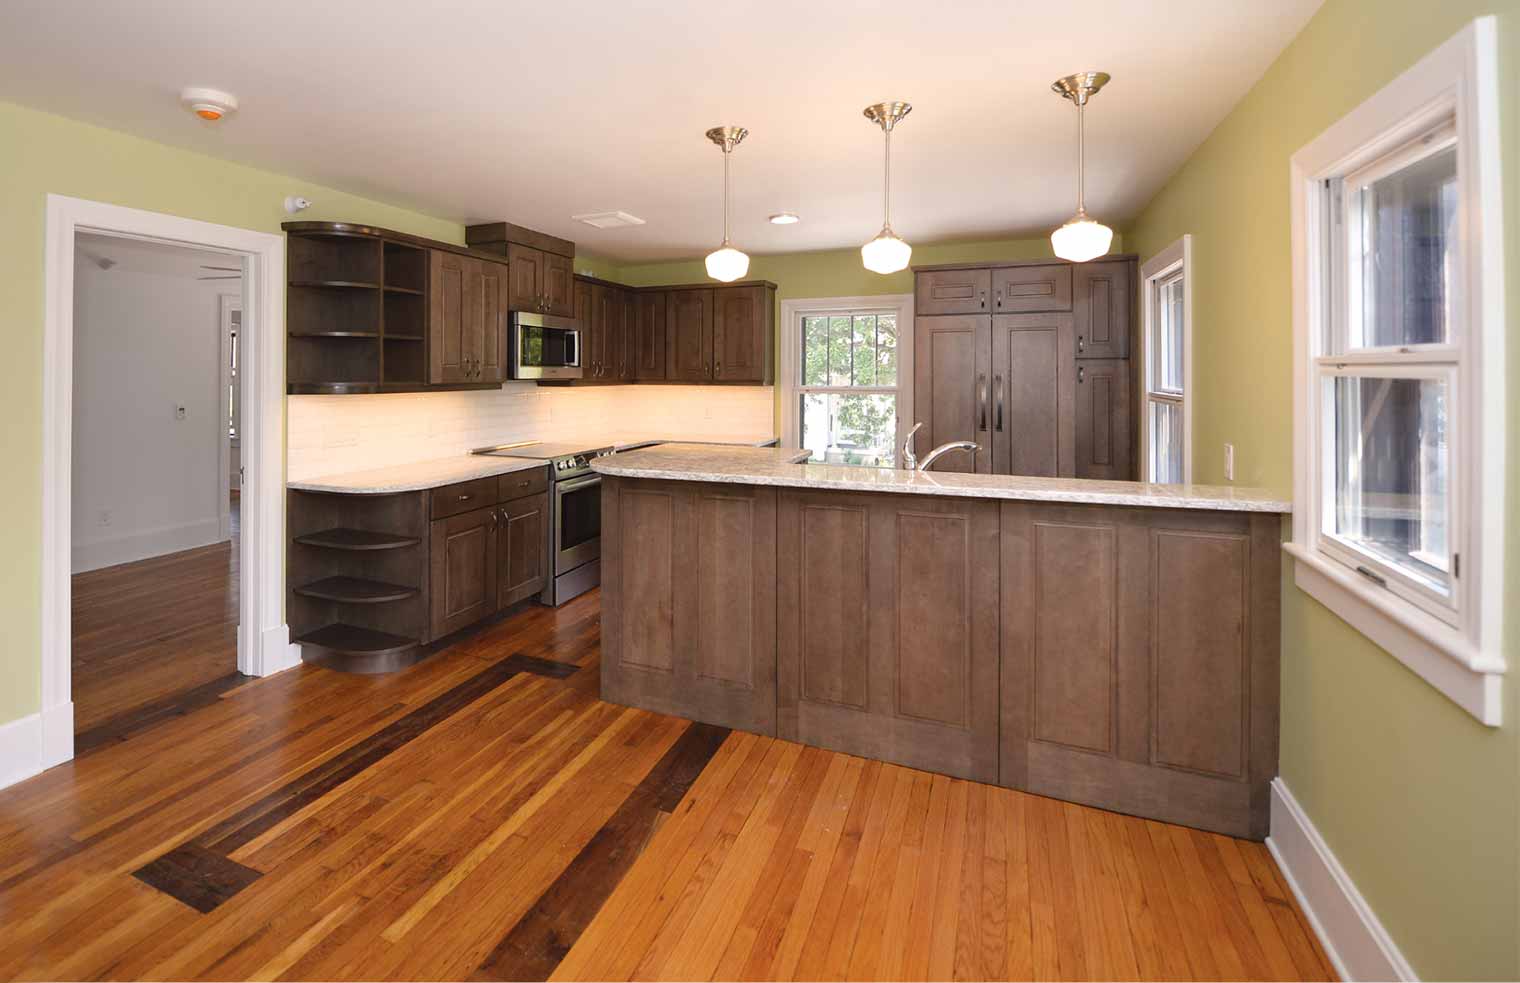 kitchen in residential space of Green & Main building above Healing Passages Birth & Wellness Center in Des Moines was designed and historically renovated by Silent Rivers featuring salvaged wood floors, Wellborn cabinetry, Cambria countertops and Bosch stainless steel appliances